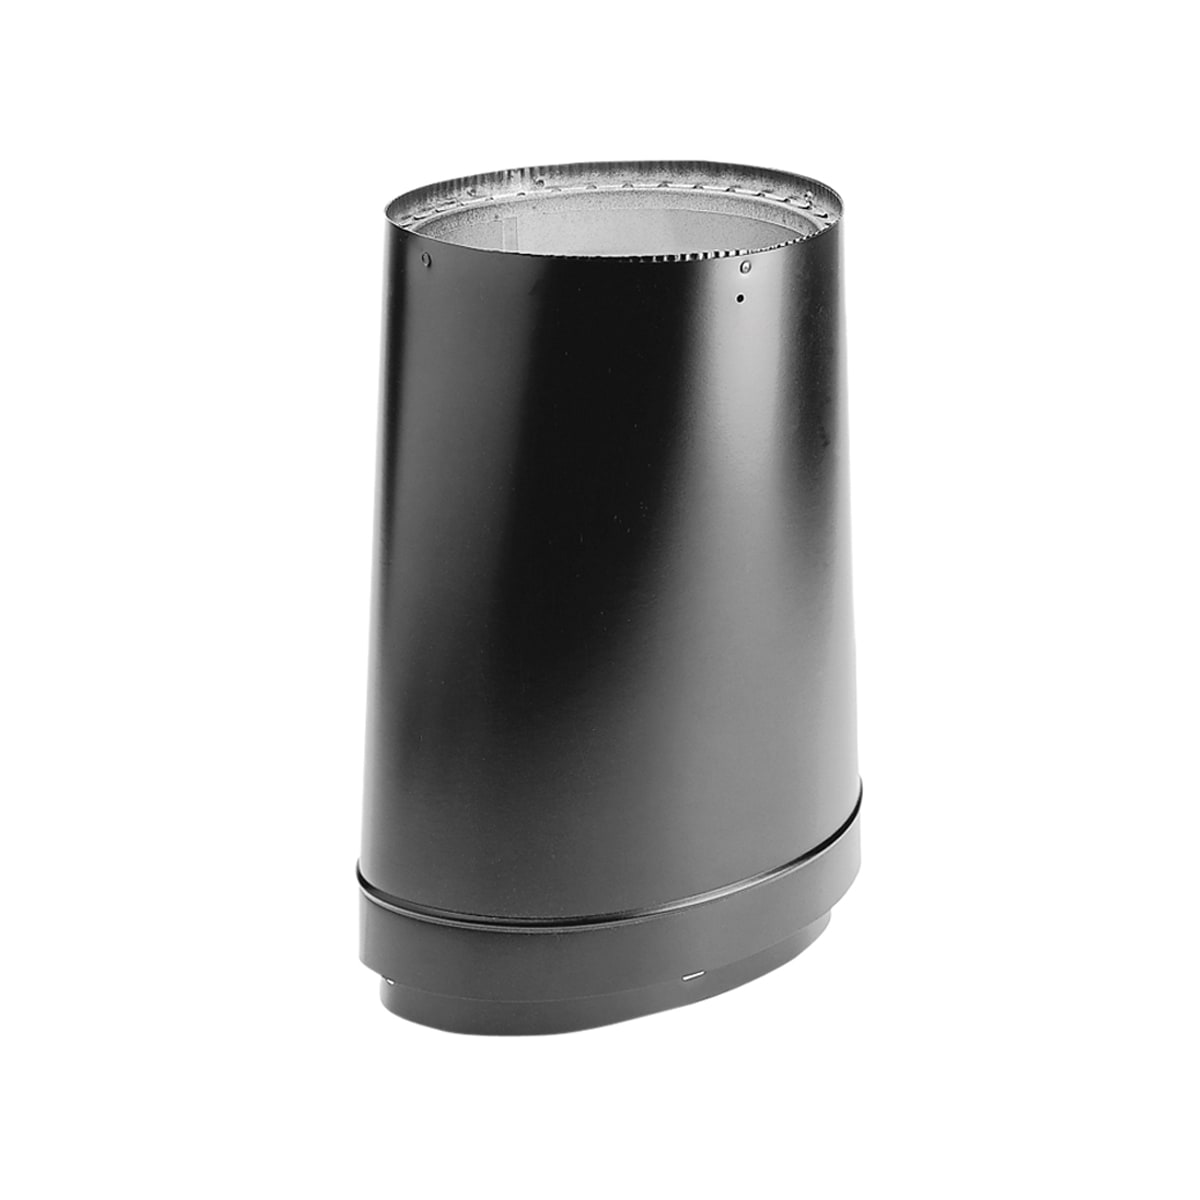 DuraVent DVL 6DVL-06 6 Double-Wall Black Pipe